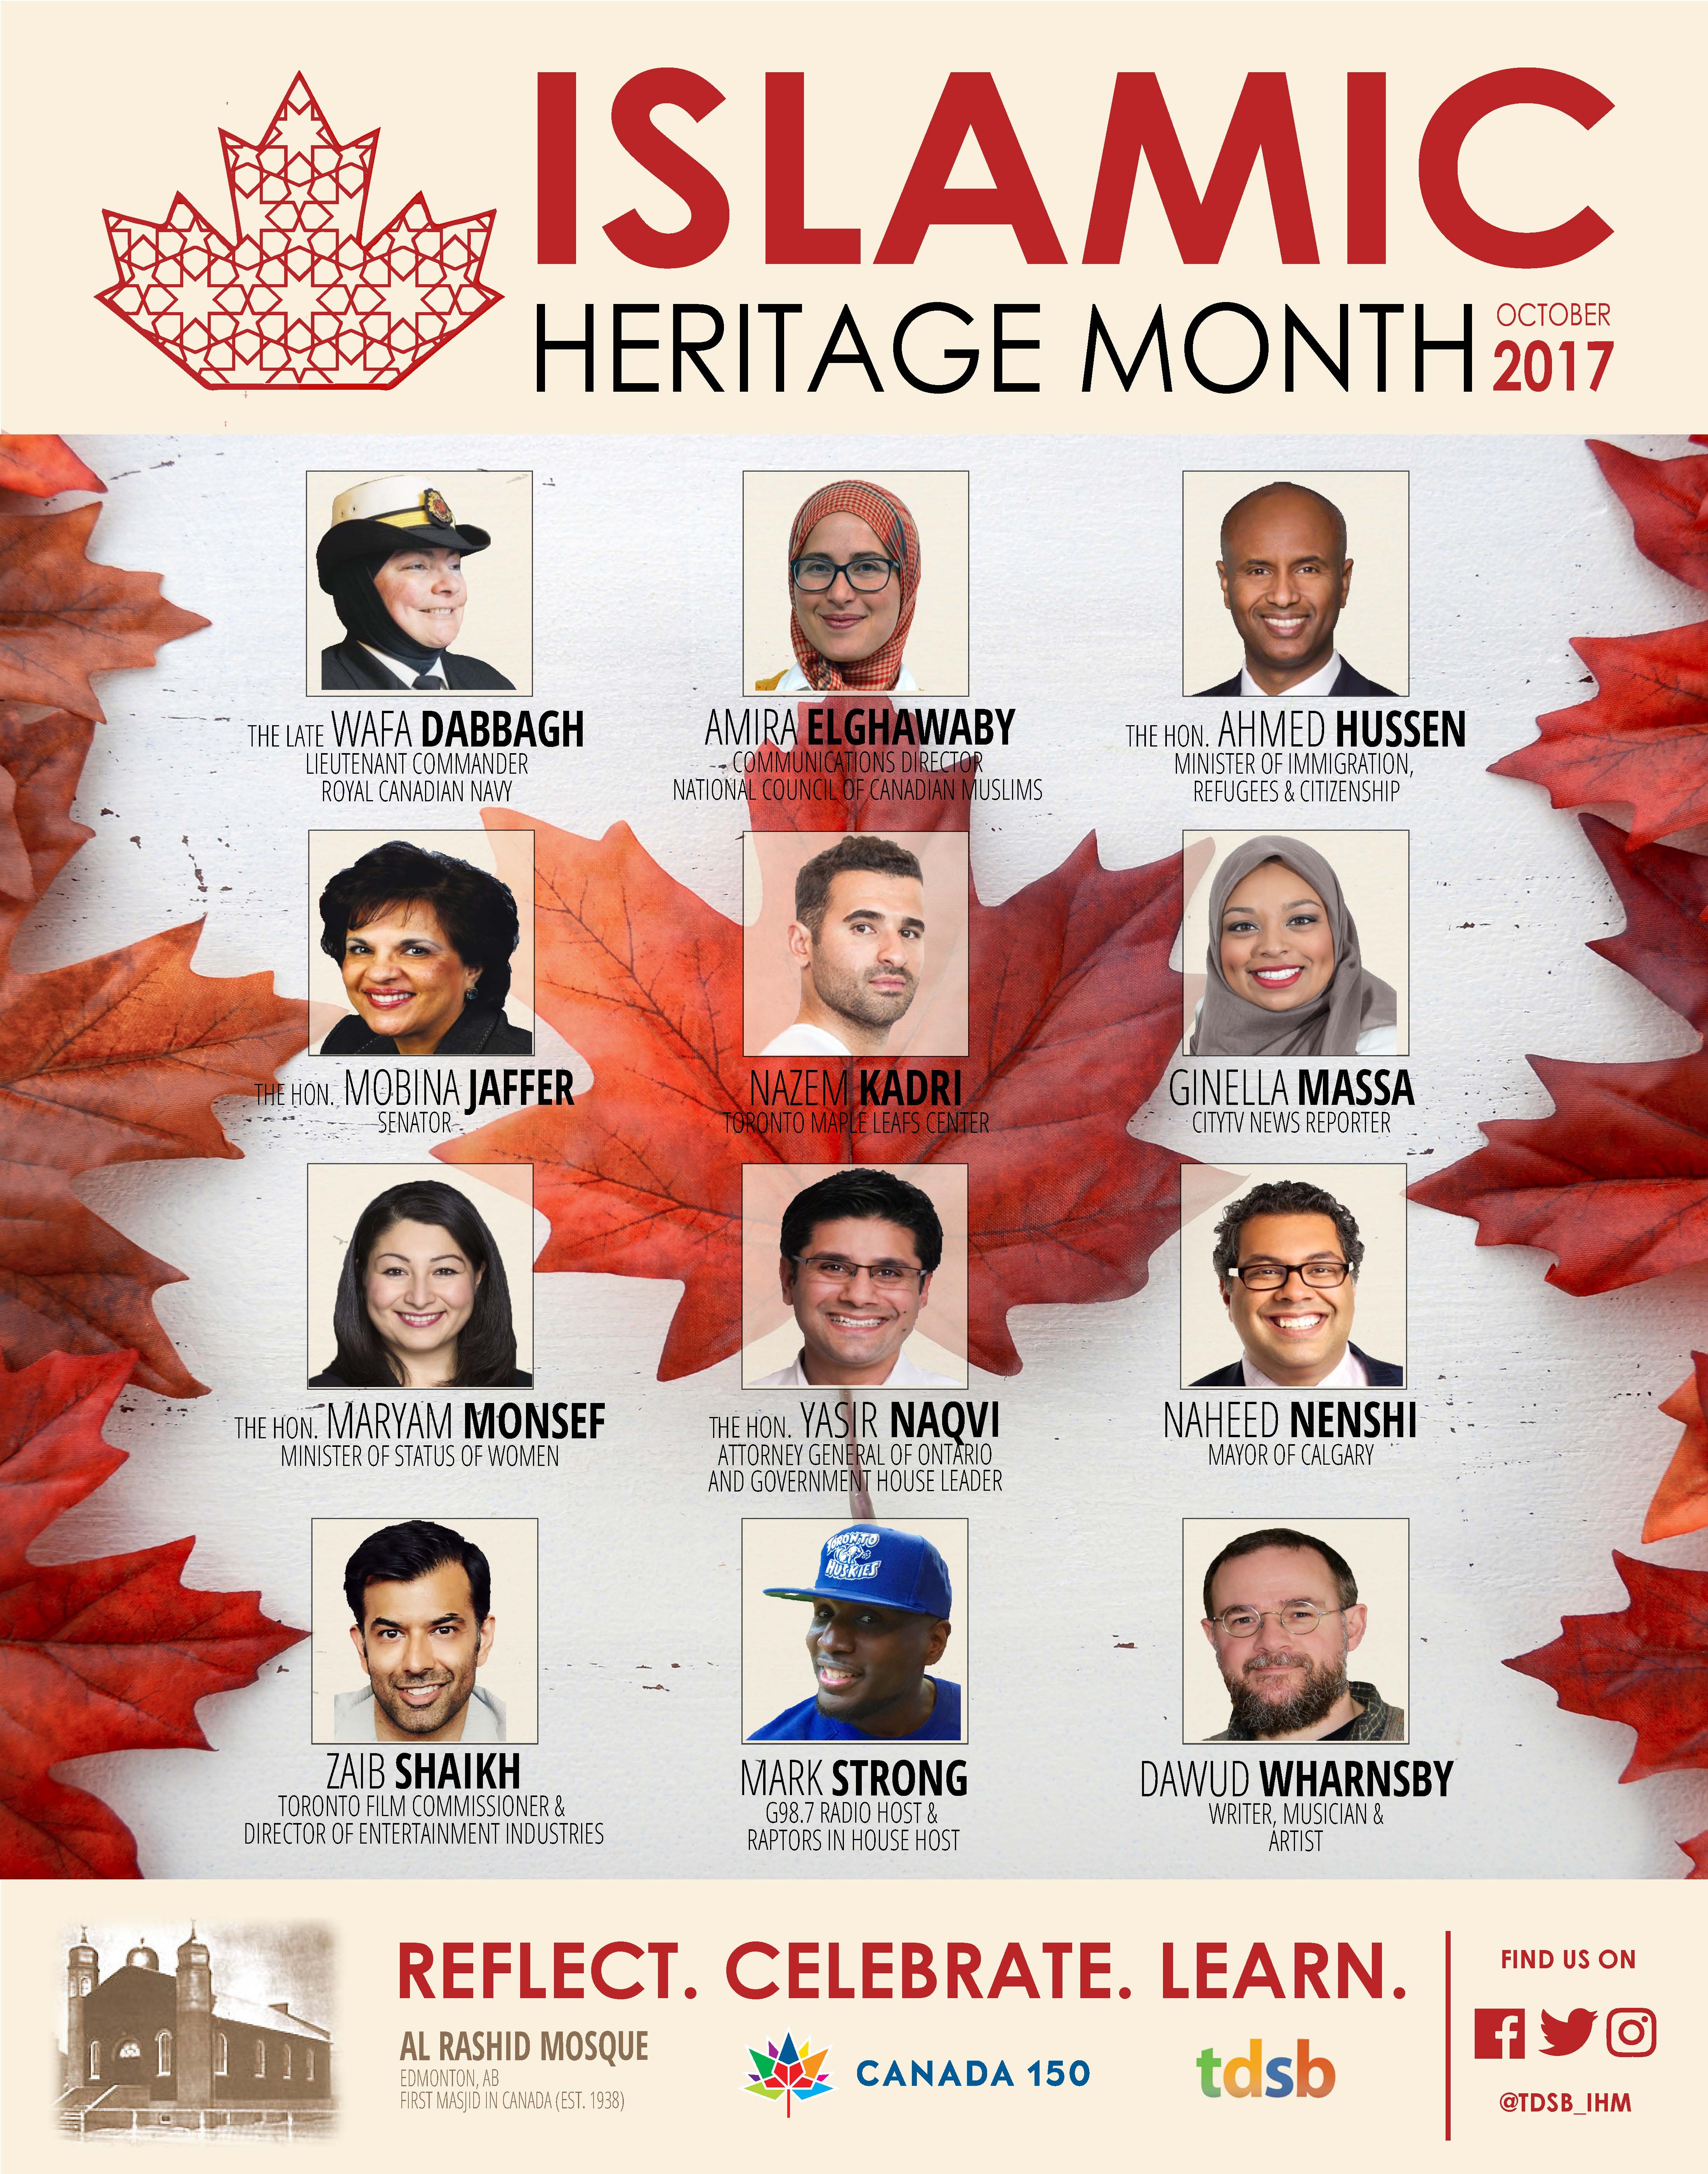 Islamic Heritage month october 2017